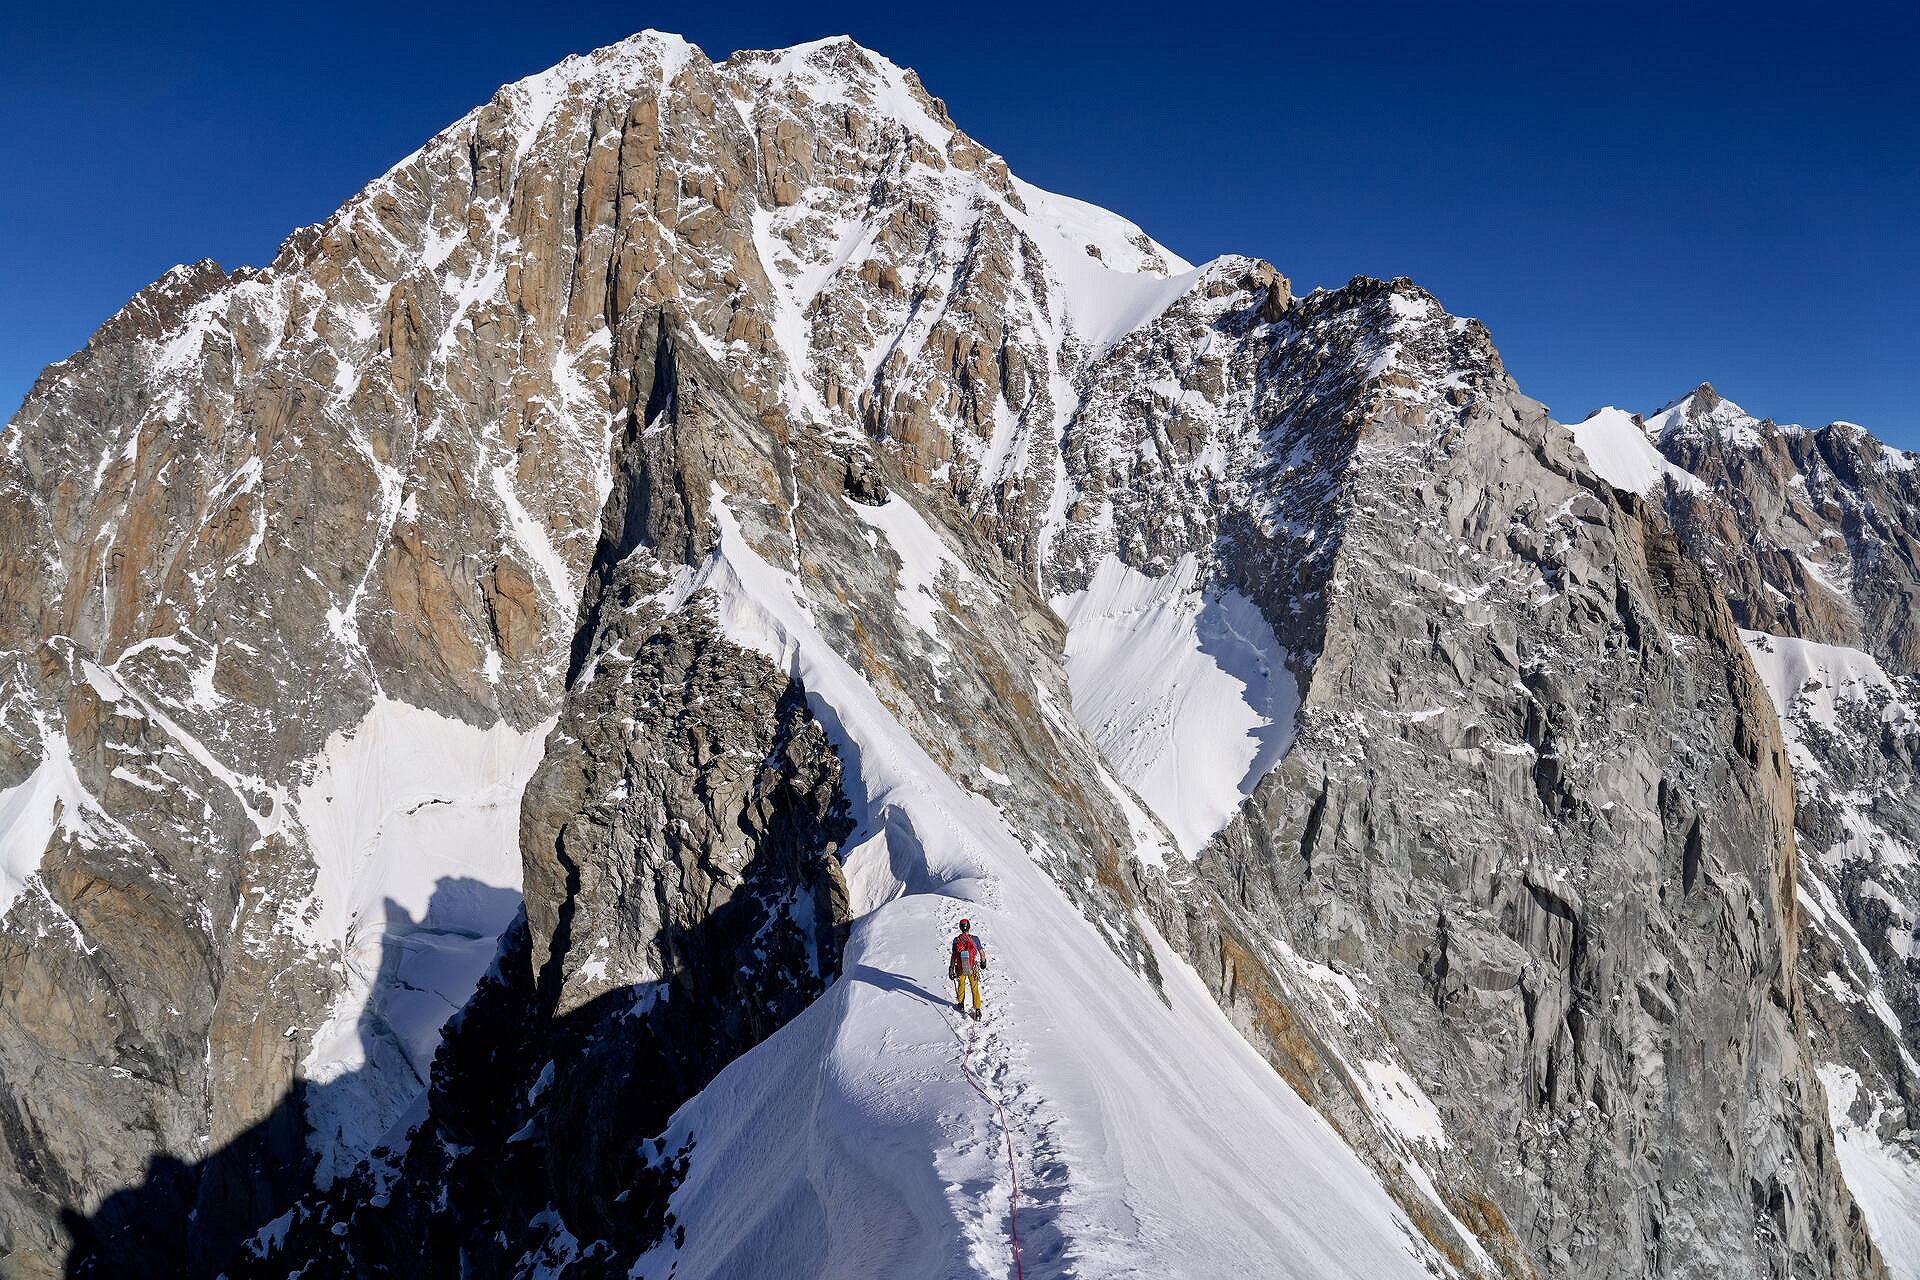 Crossing the Aiguille Blanche de Peuterey with the wild south side of Mont Blanc in front of us  © Hamish Frost